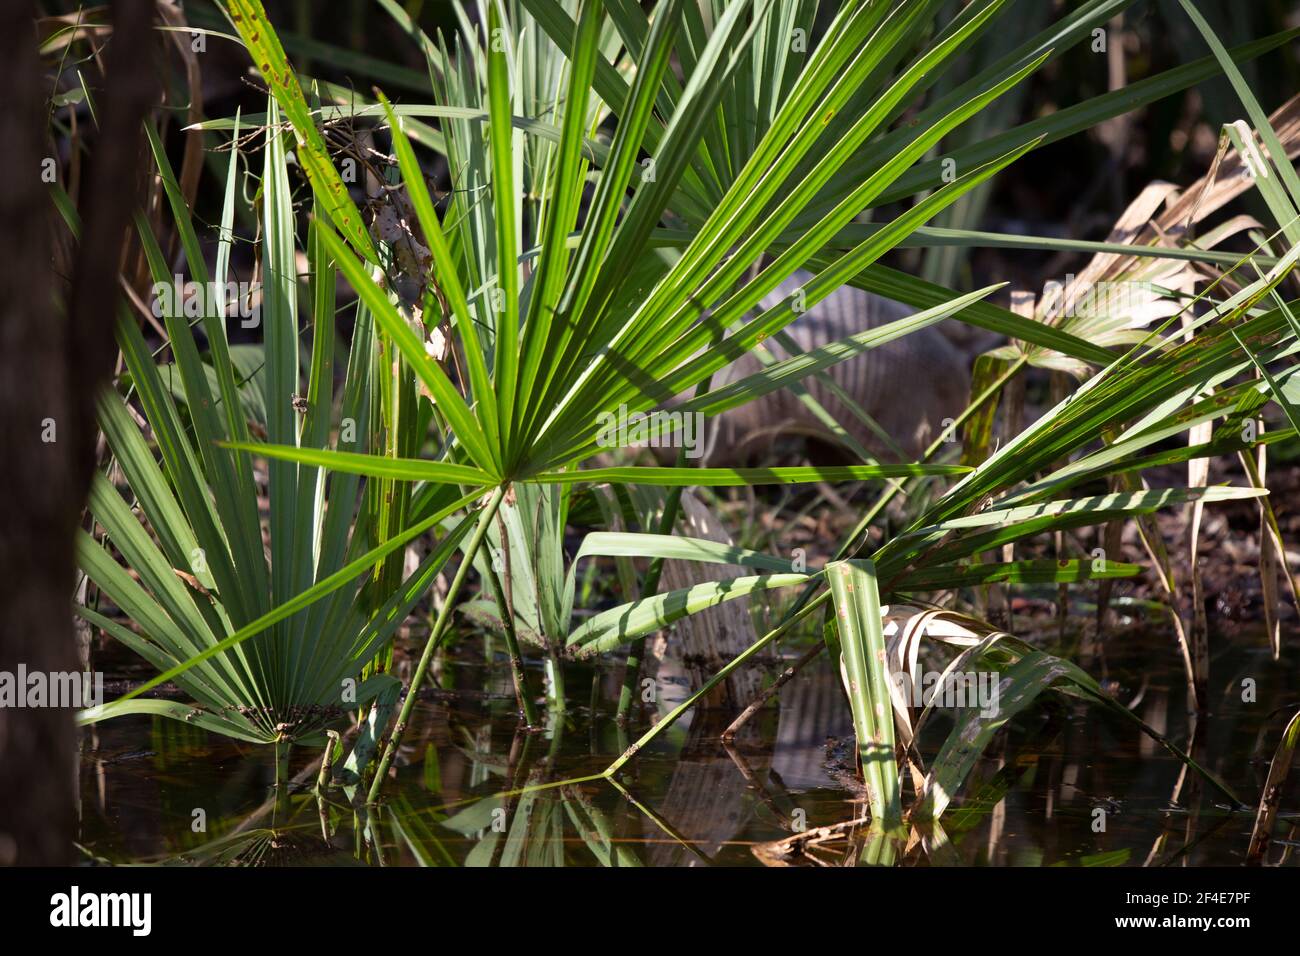 Nine-banded armadillo (Dasypus novemcinctus) foraging near a stream, focus on the palmetto plants in front of the armadillo Stock Photo